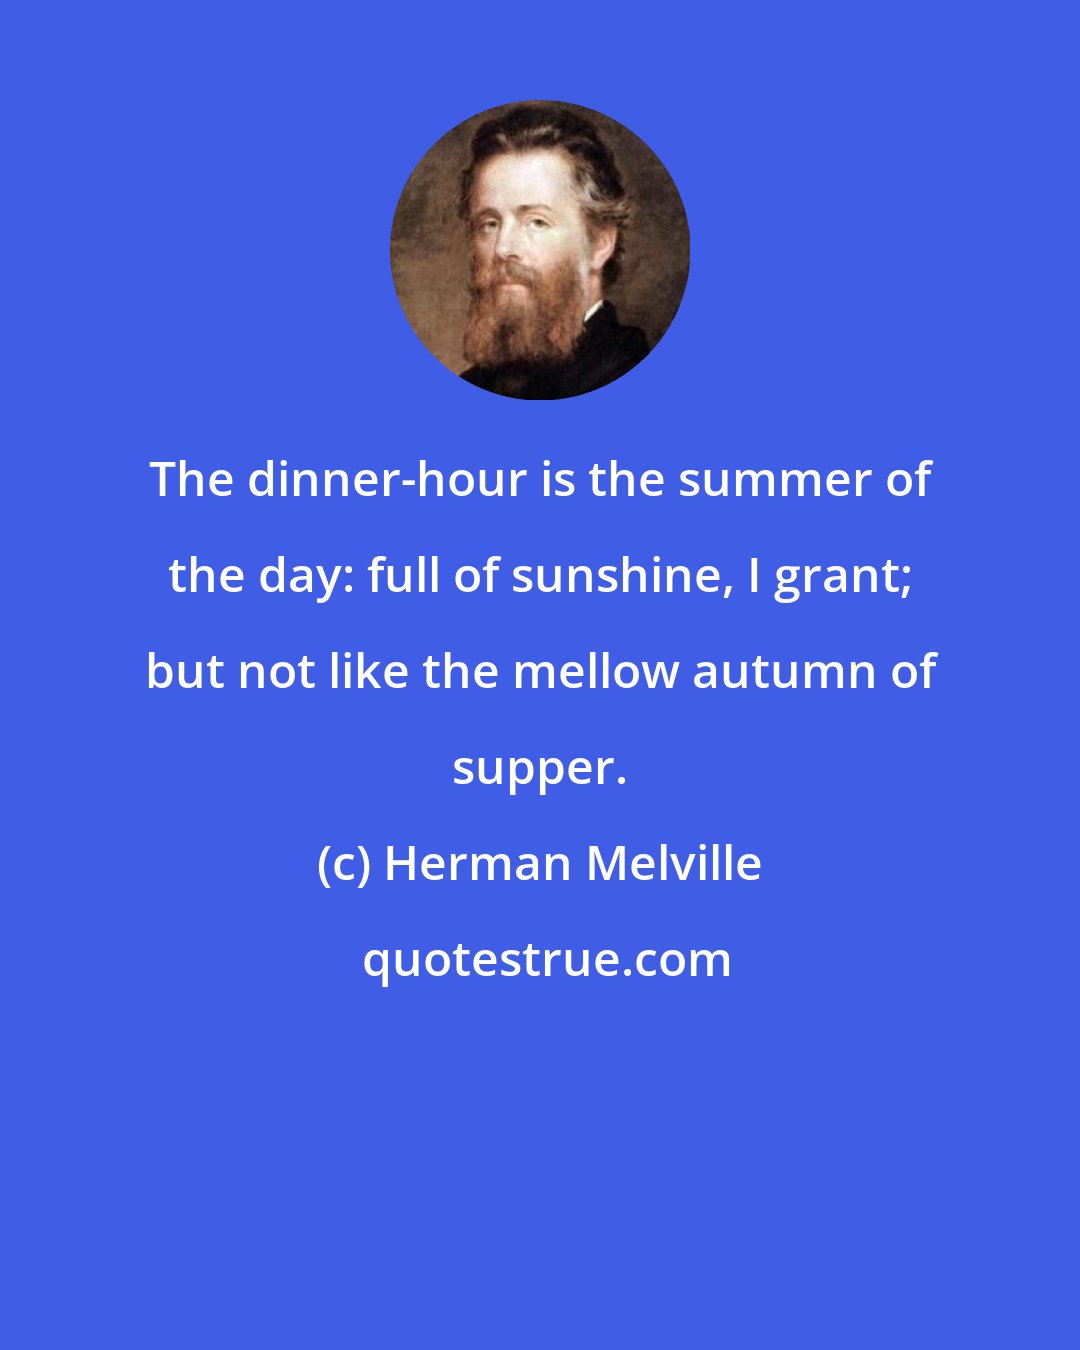 Herman Melville: The dinner-hour is the summer of the day: full of sunshine, I grant; but not like the mellow autumn of supper.